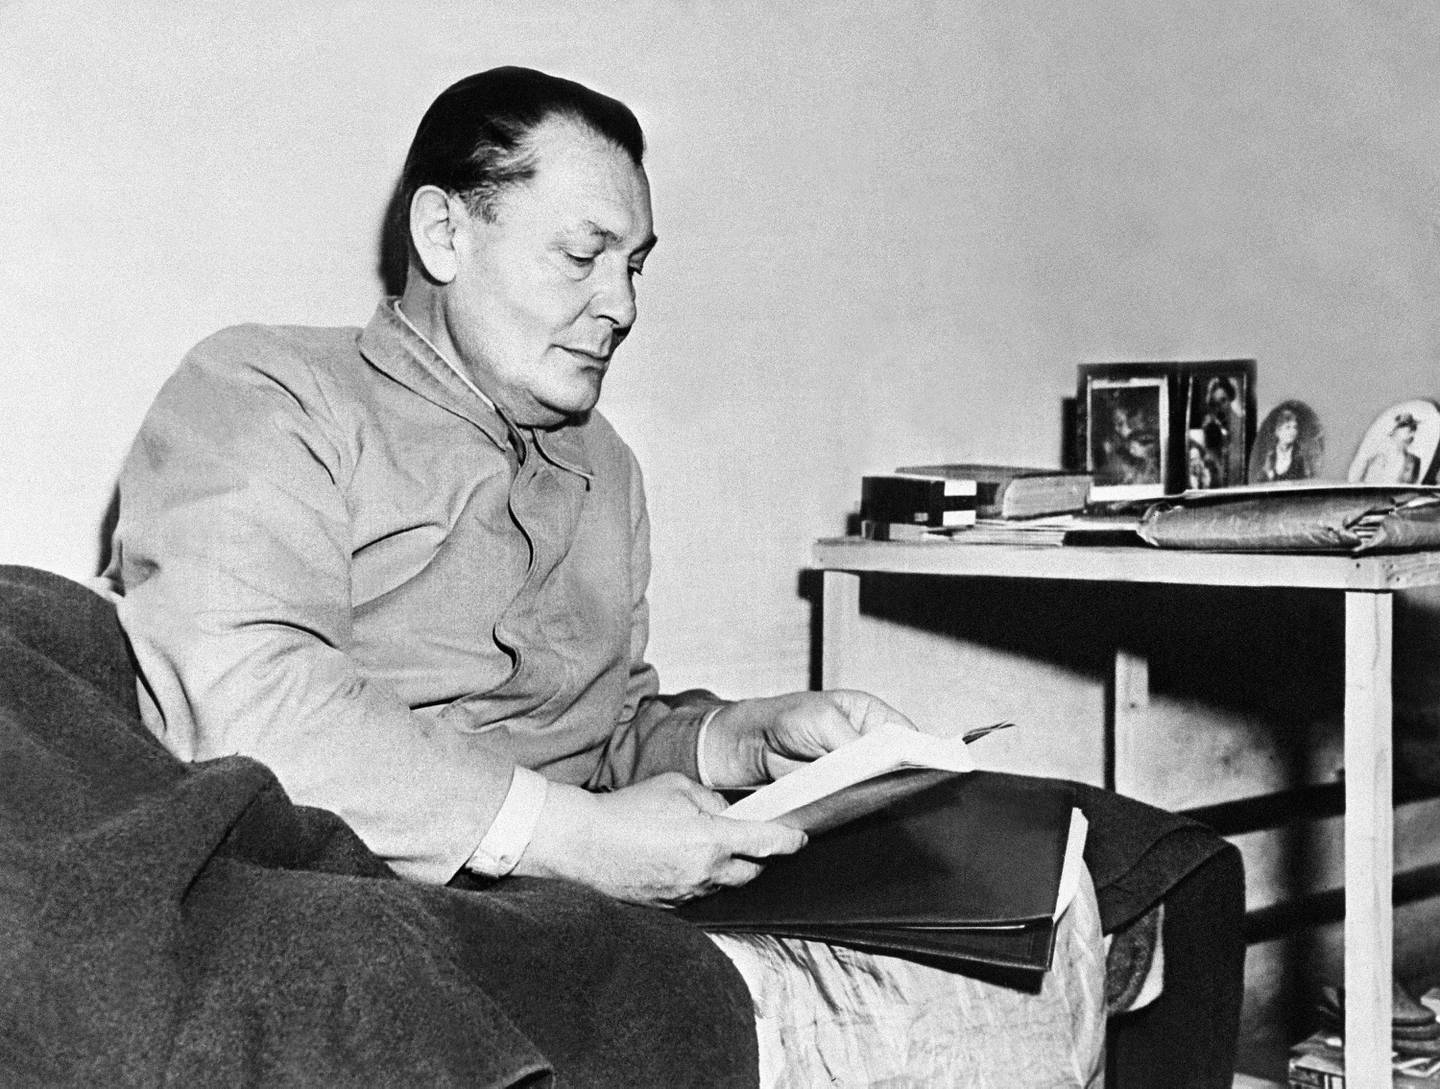 A photo dated circa December 1945 shows Hermann Goering reading in his prison cell in Nuremberg. On November 20, 1945, the first international trial in history opened in Nuremberg, Germany, forcing 21 senior Nazi officials including Adolf Hitler's designated successor Hermann Goering to face justice for the first time.